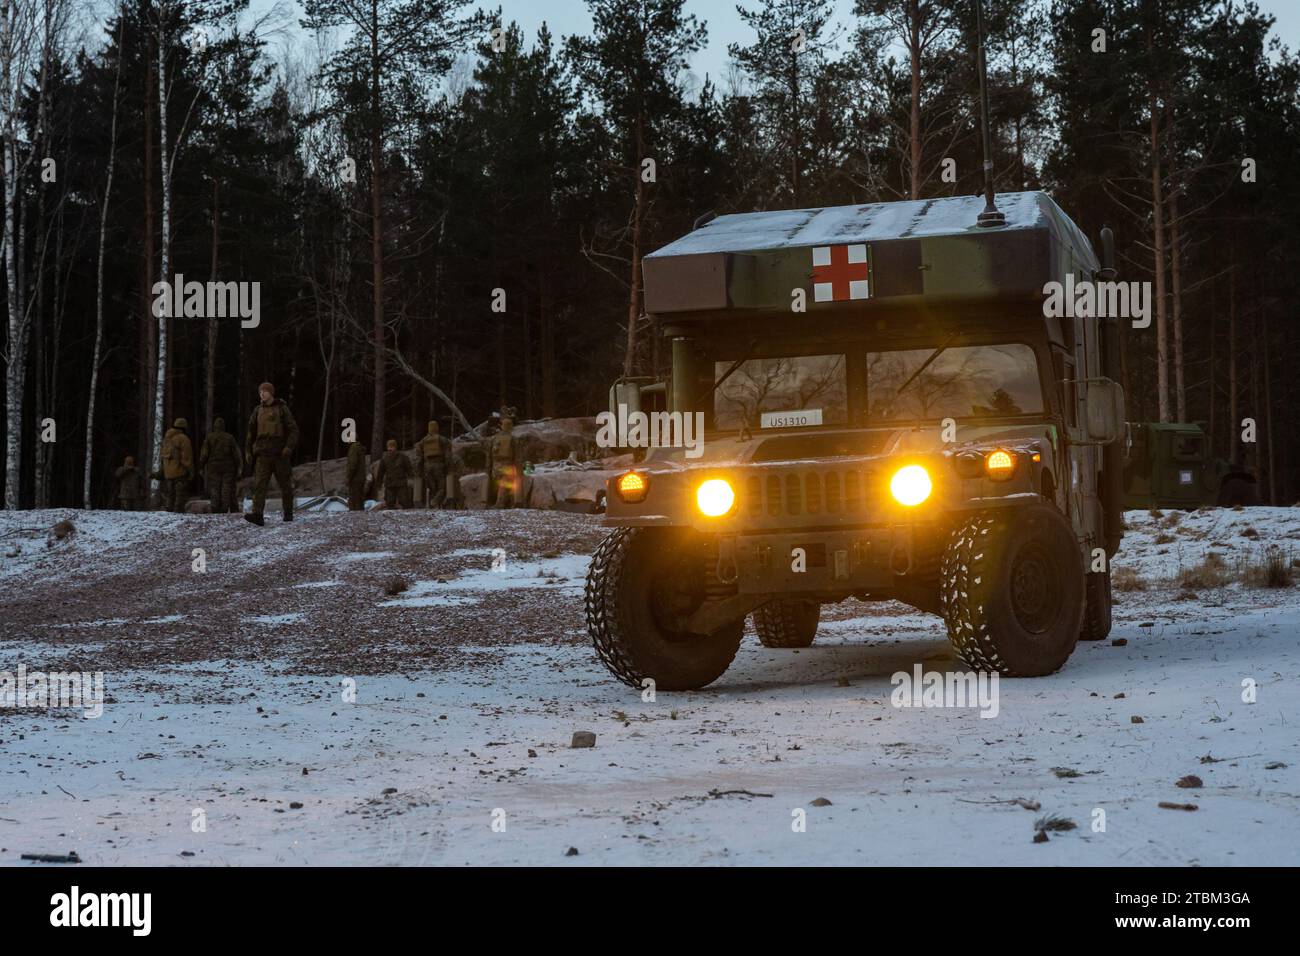 A U.S. Marine Corps M997A3 Humvee stages at the Shock Trauma Platoon’s medical tent location during exercise Freezing Winds 23 in Upinniemi, Finland, Nov. 26, 2023. FW23 is a Finnish-led maritime exercise in which United States Marines assigned to Marine Rotational Force- Europe, and U.S. Navy Forces Europe take part. The exercise serves as a venue to increase Finnish Navy readiness and increase U.S., Finland, and NATO partners and allies interoperability in operational logistics, integrated fires, and amphibious operations in and around Baltic Sea littorals. (U.S. Marine Corps photo by Lance Stock Photo